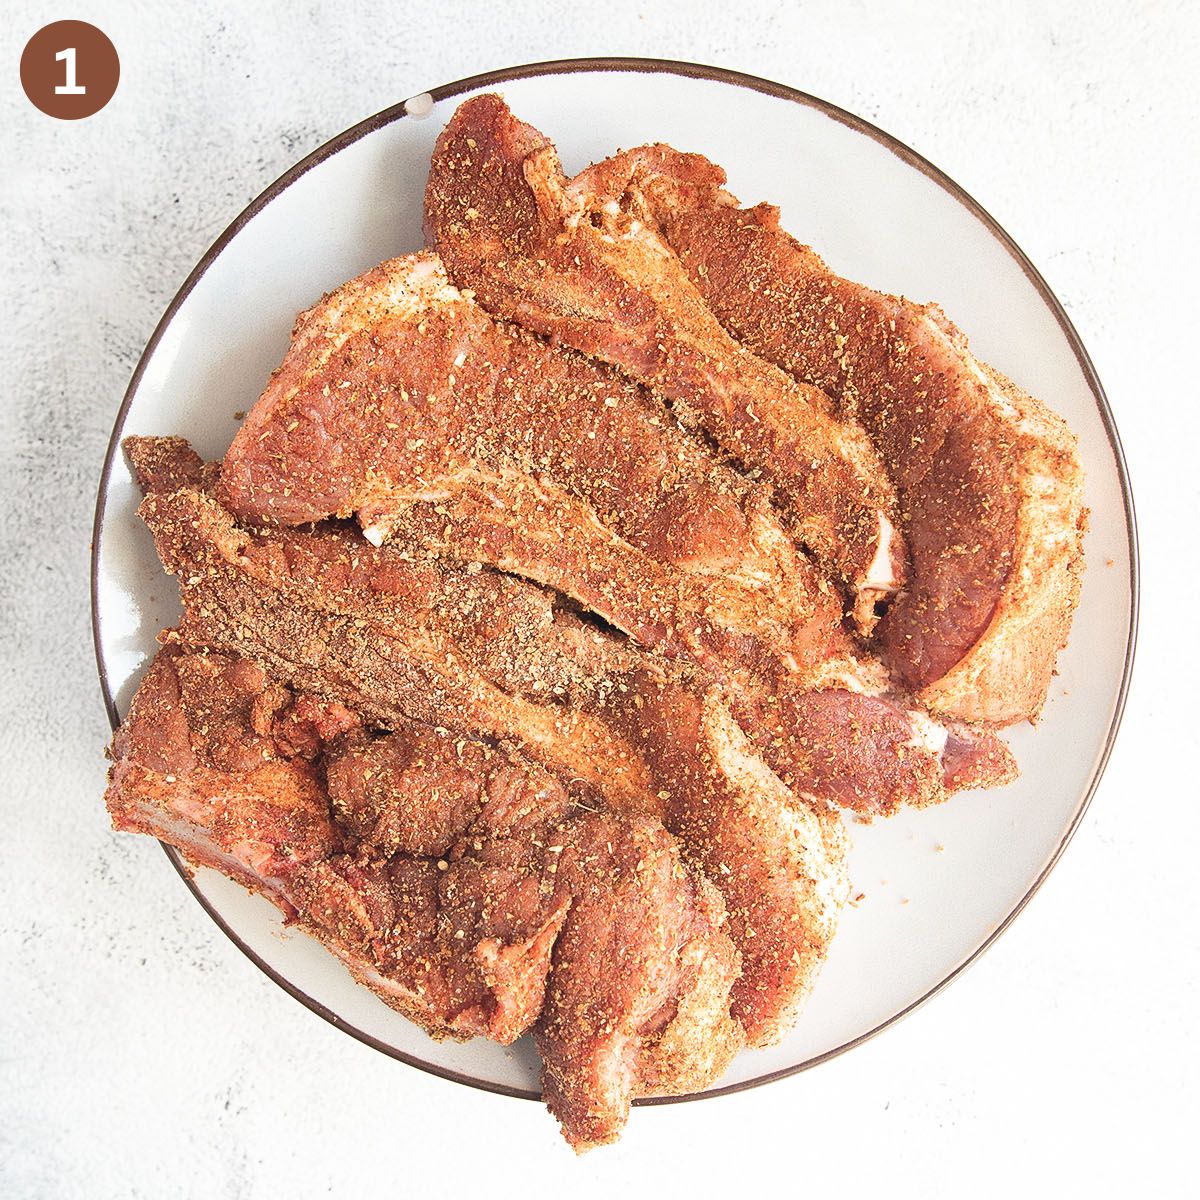 raw country style pork ribs seasoned with dry rub on a white plate.